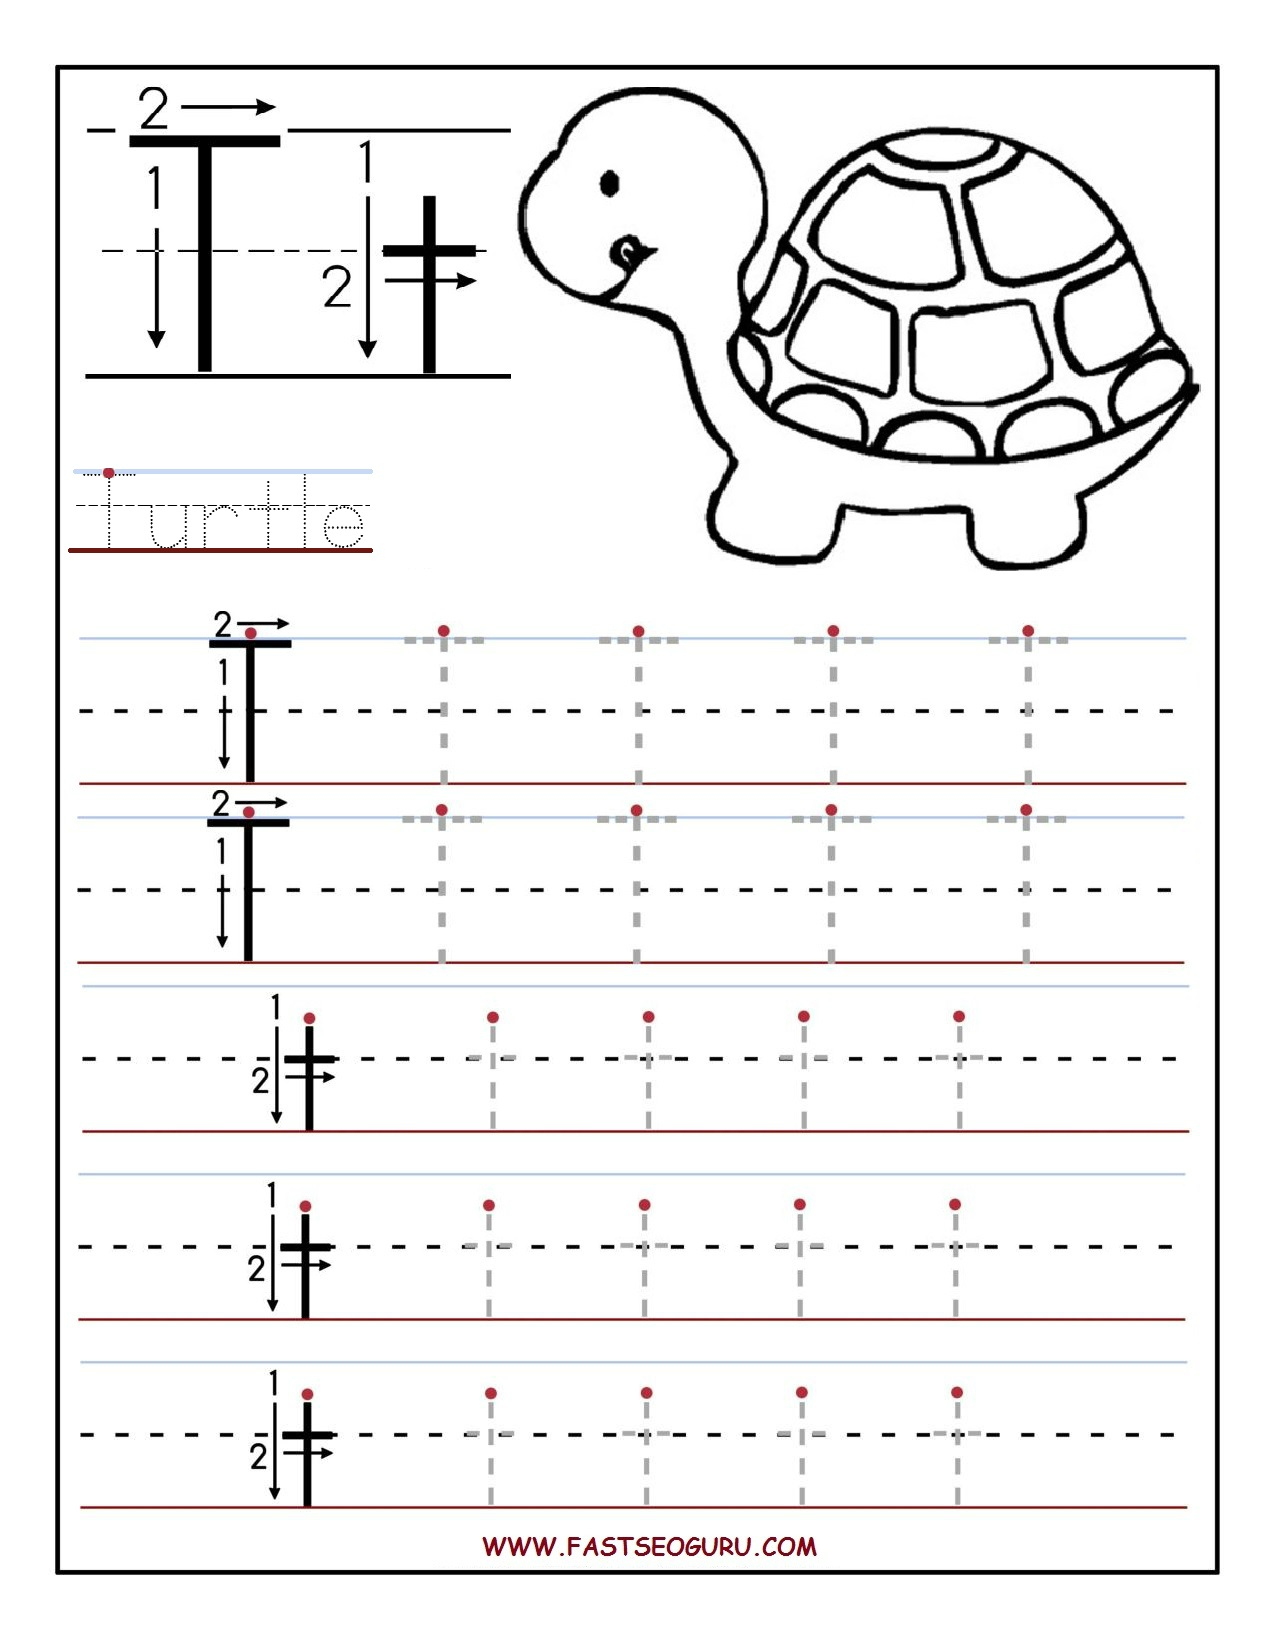 Printable Letter T Tracing Worksheets For Preschool Uldwvdrz regarding Letter T Tracing Worksheet